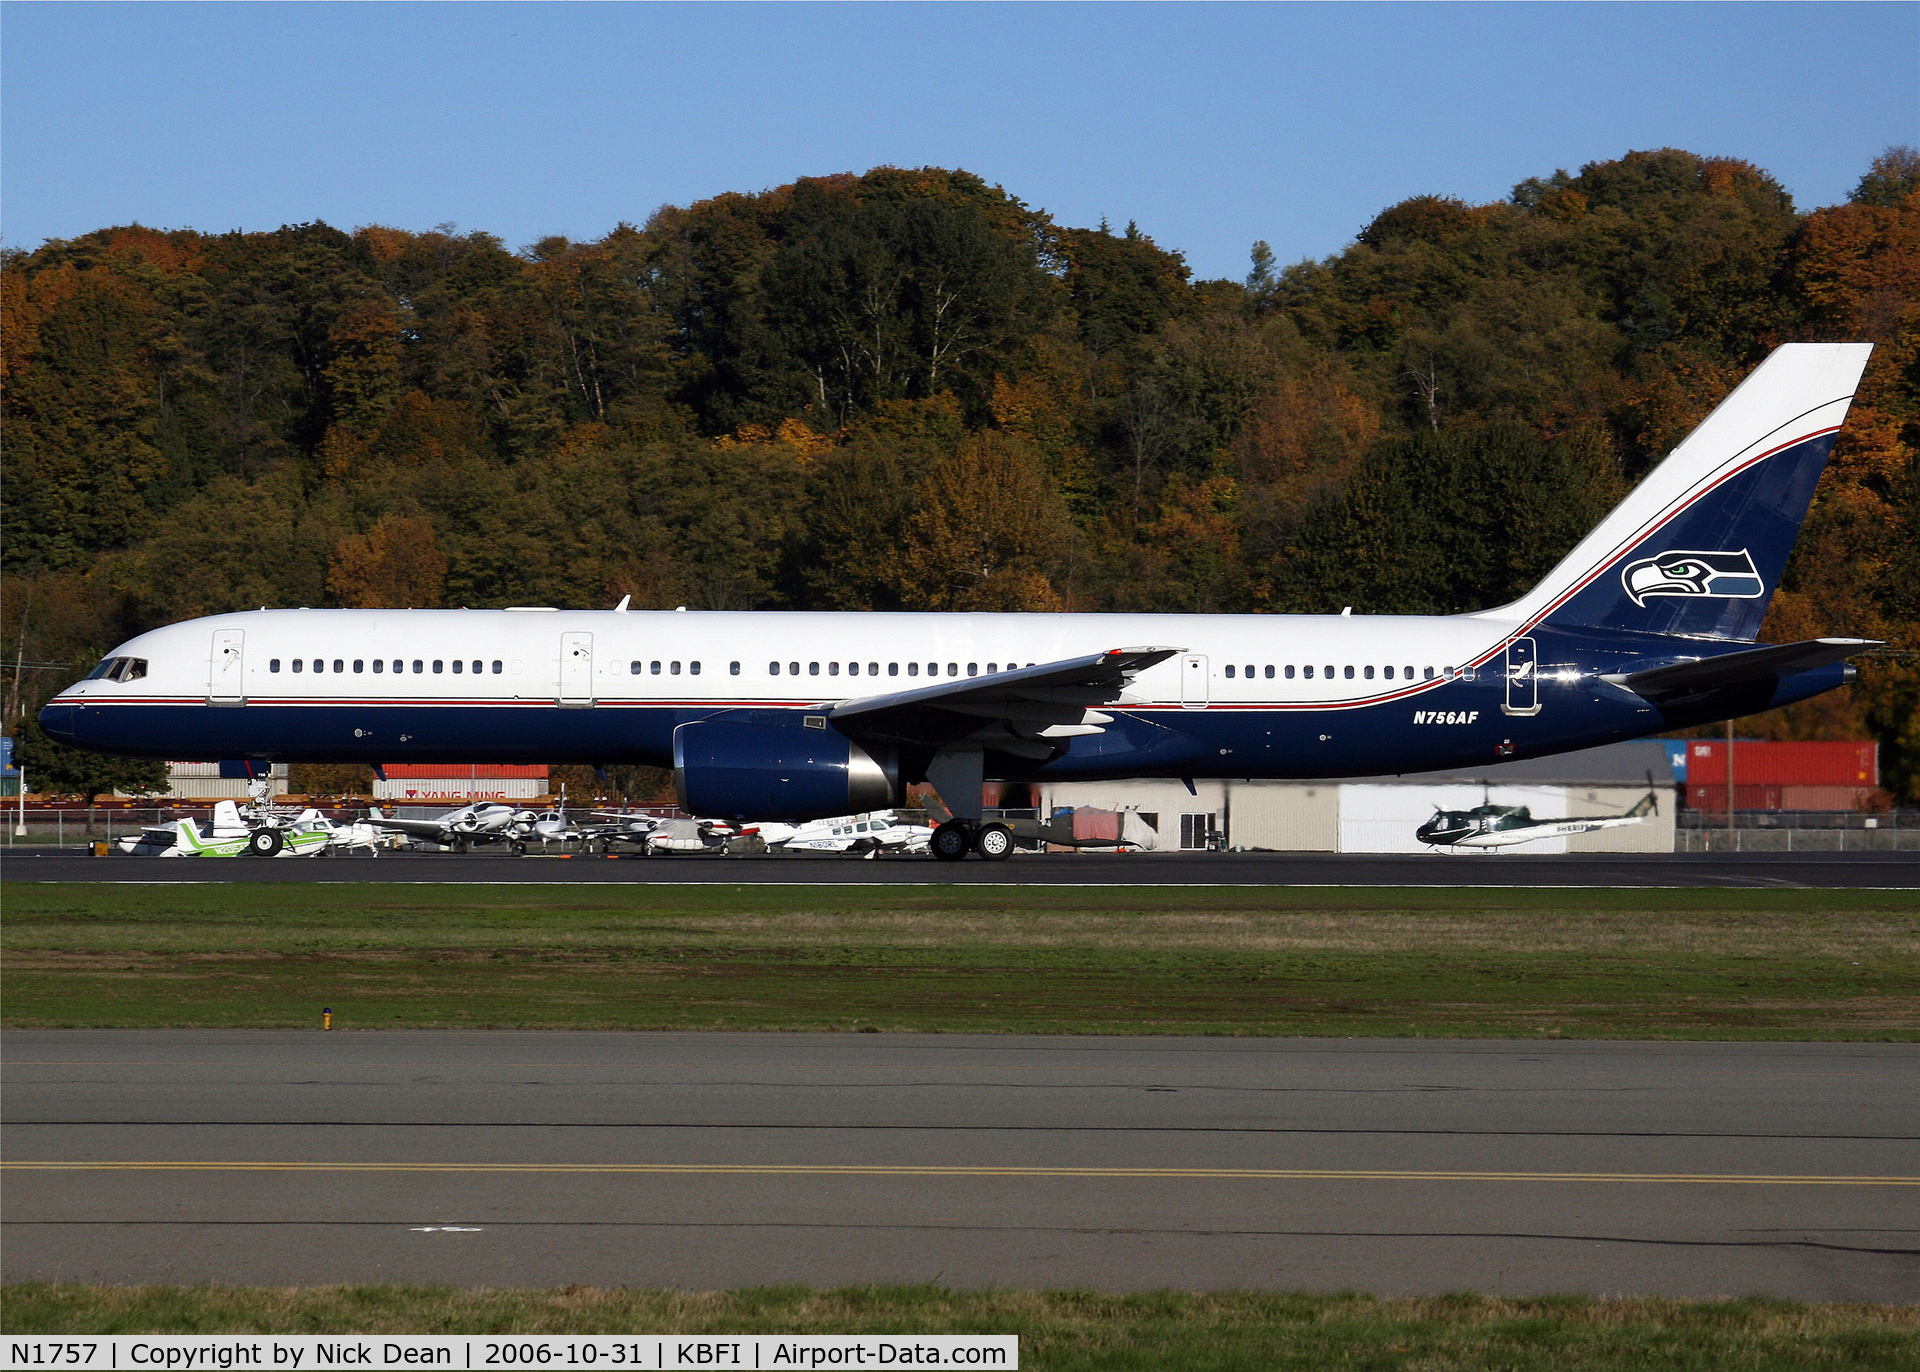 N1757, 1991 Boeing 757-23A C/N 24923, KBFI (Seen here as N756AF this was Paul Allens Seahawks team ride and now registered N1757 as posted)